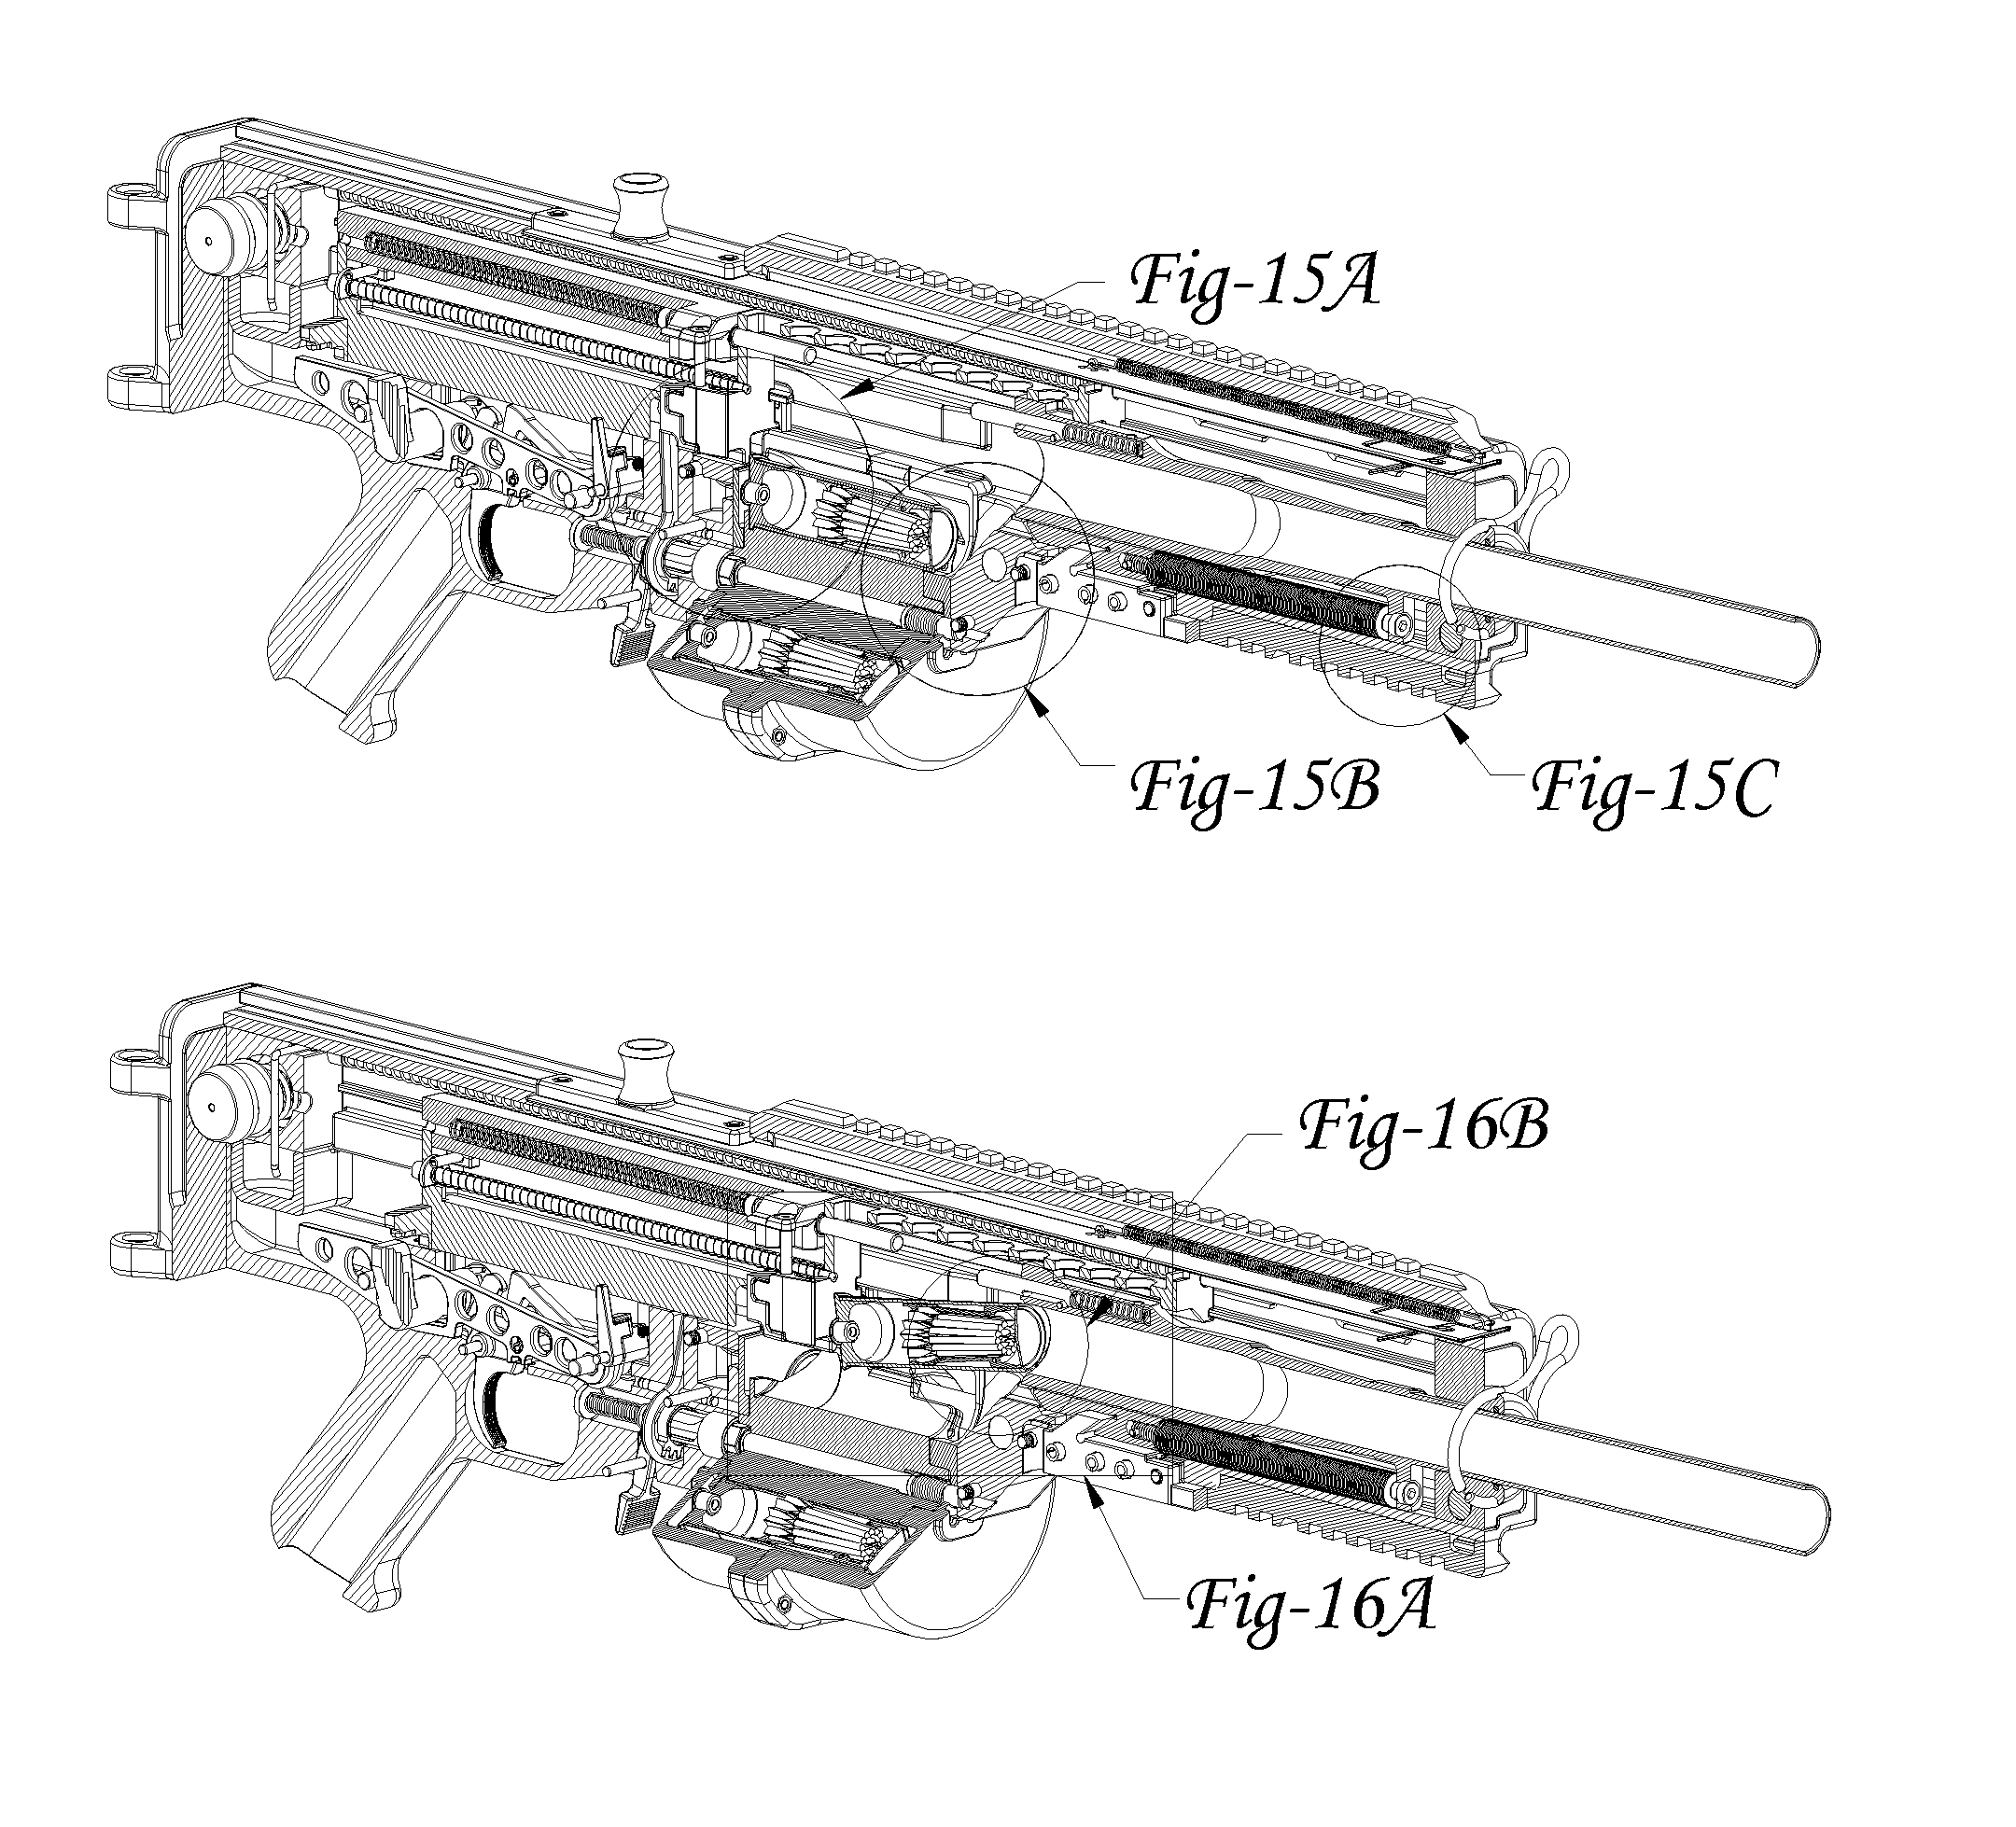 Urban combat system automatic firearm having ammunition feed controlled by weapon cycle